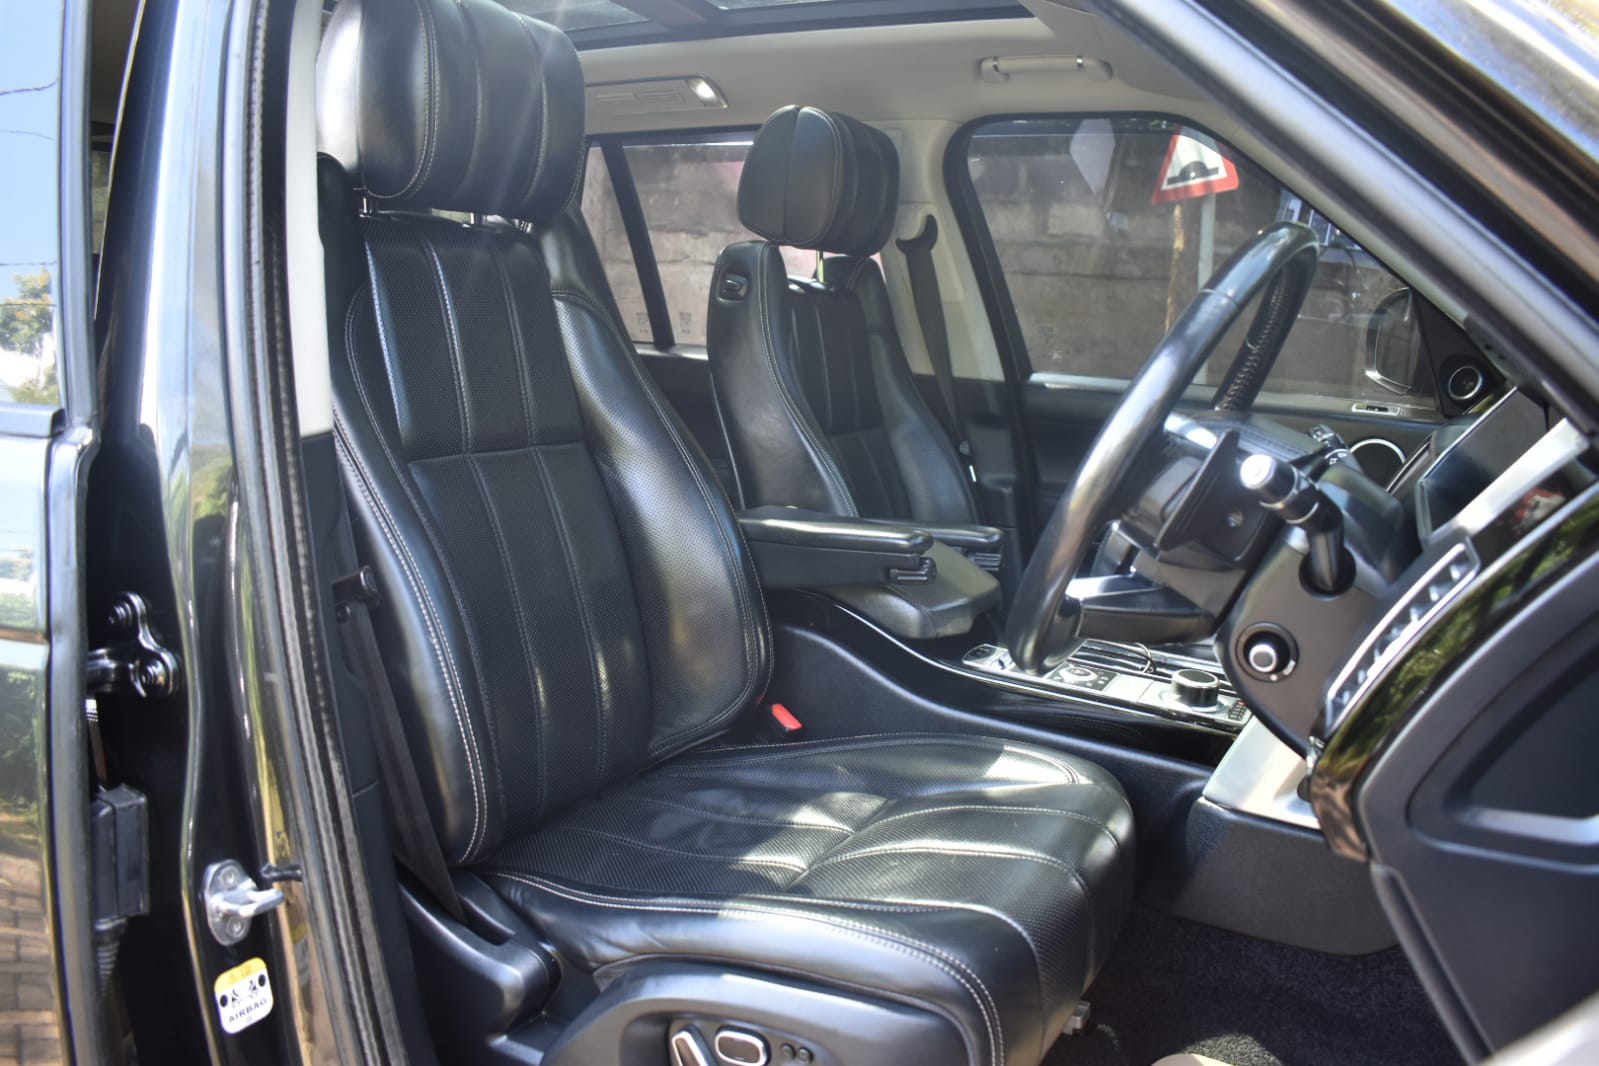 RANGE ROVER VOGUE SDV8 4.4 SUNROOF You Pay 40% DEPOSIT TRADE IN OK For sale in kenya exclusive